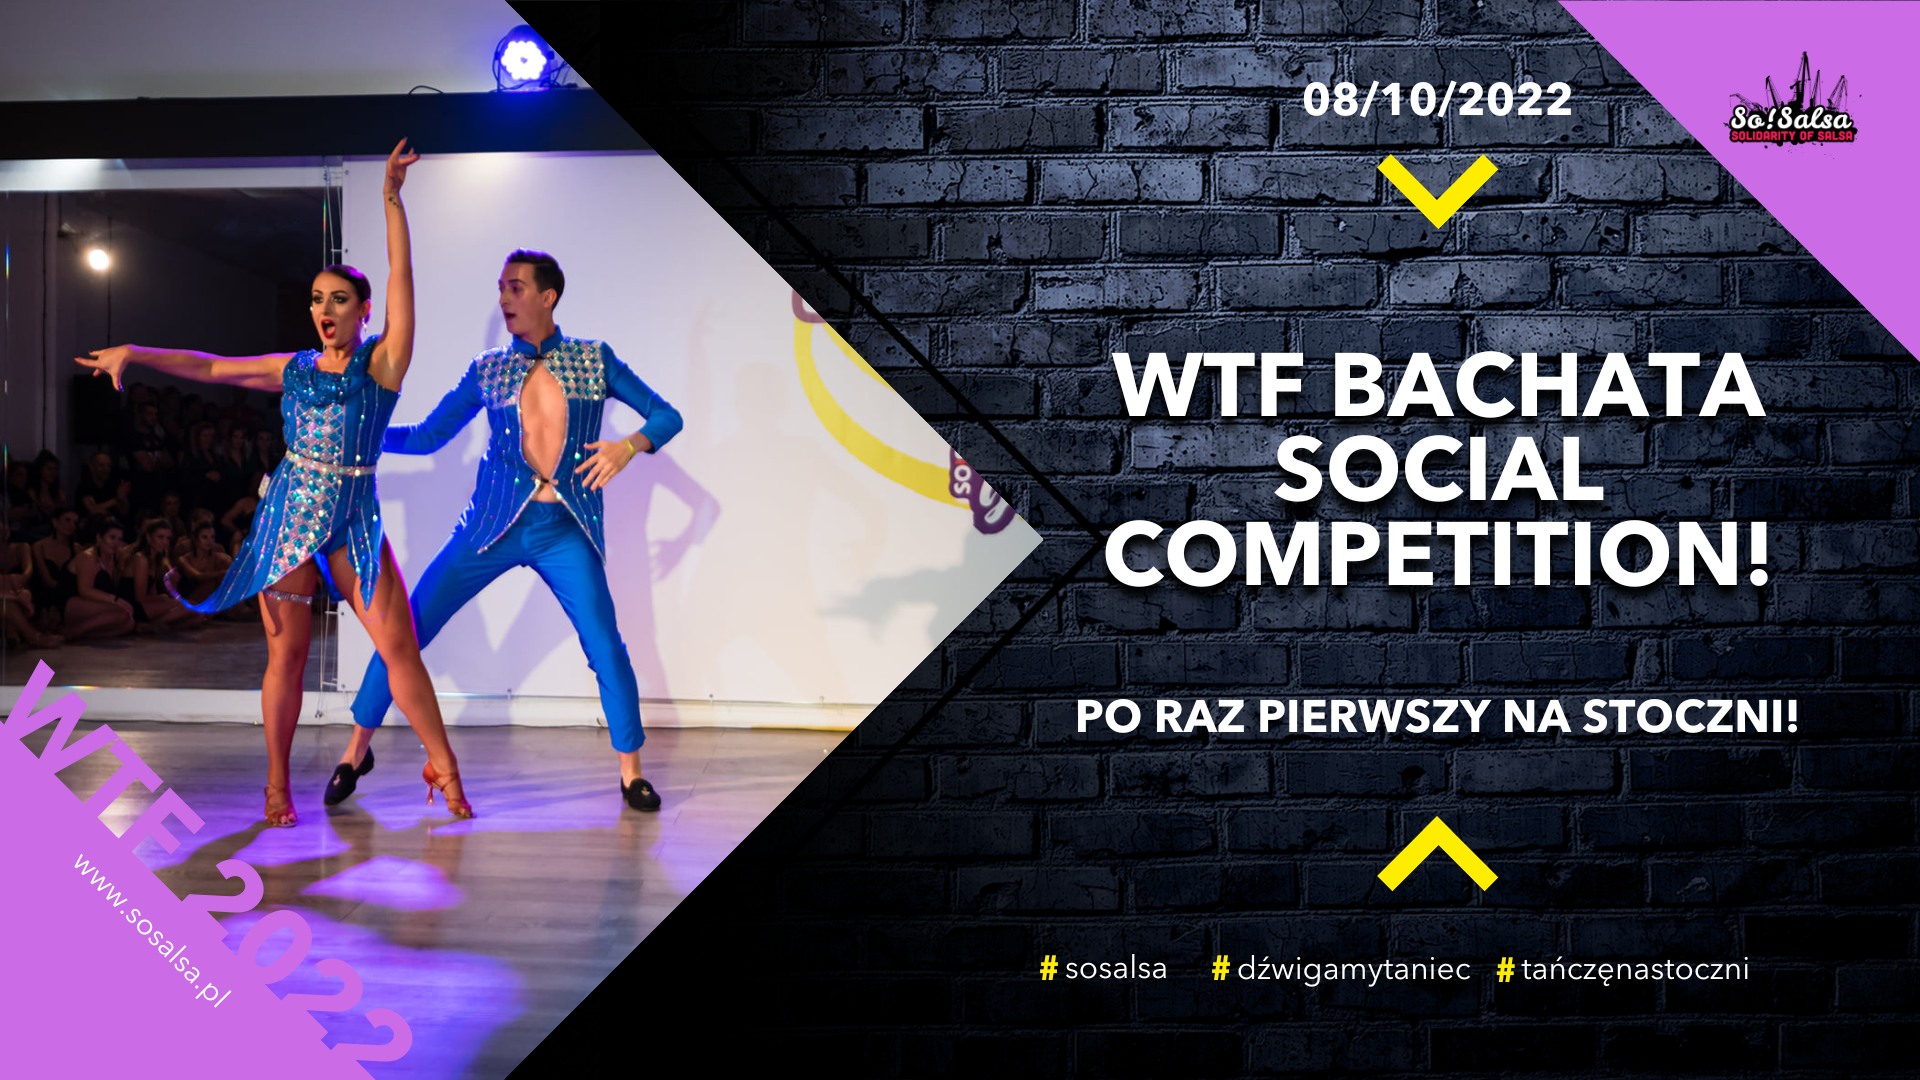 WTF BACHATA SOCIAL COMPETITION 2022 - 1ST EDITION!